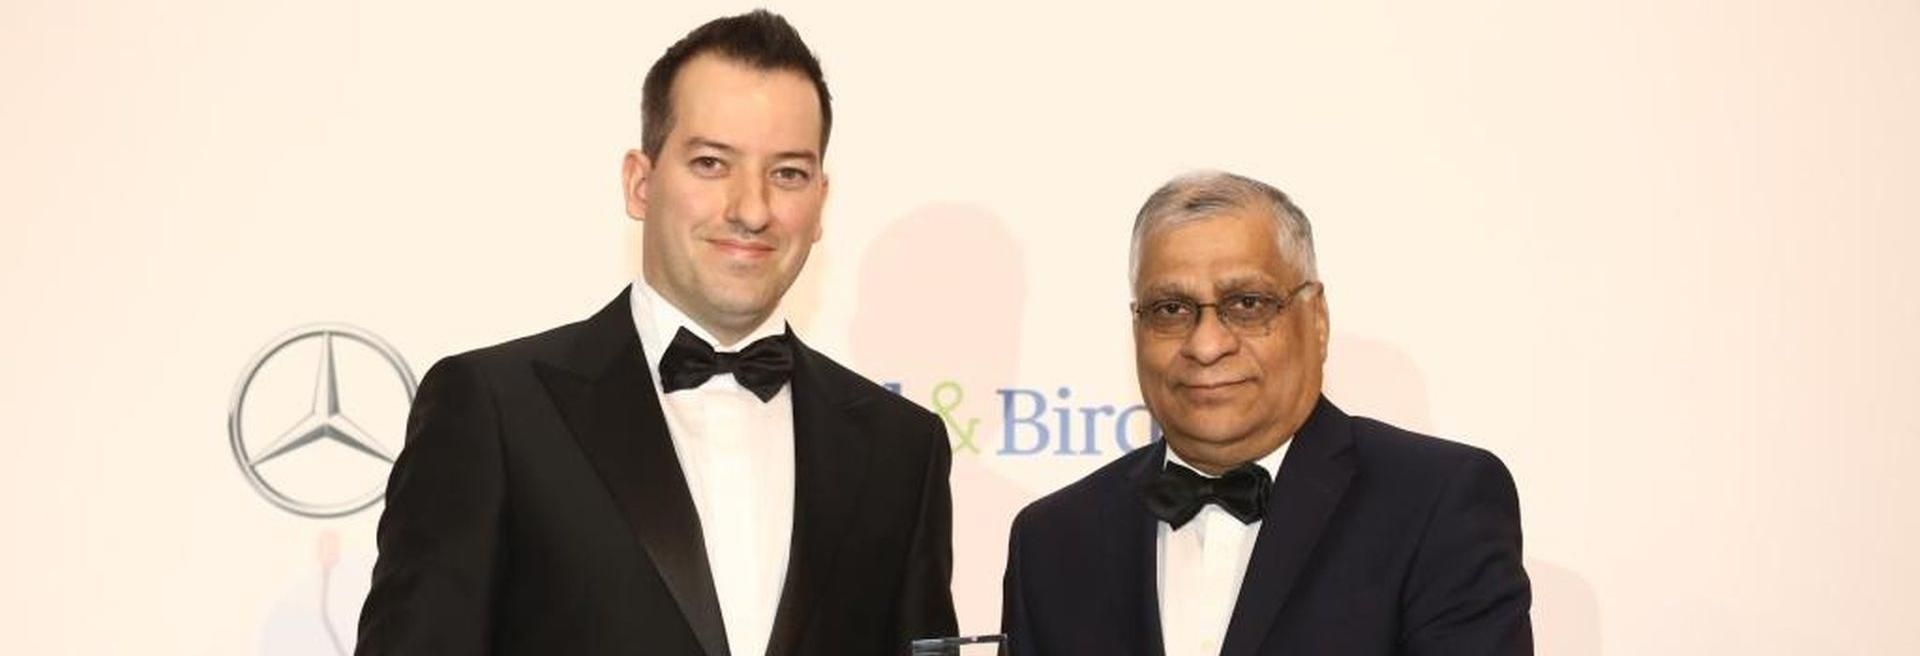 The Expat CEO of the Year prizes were awarded to the heads of ABB and Apollo Tyres